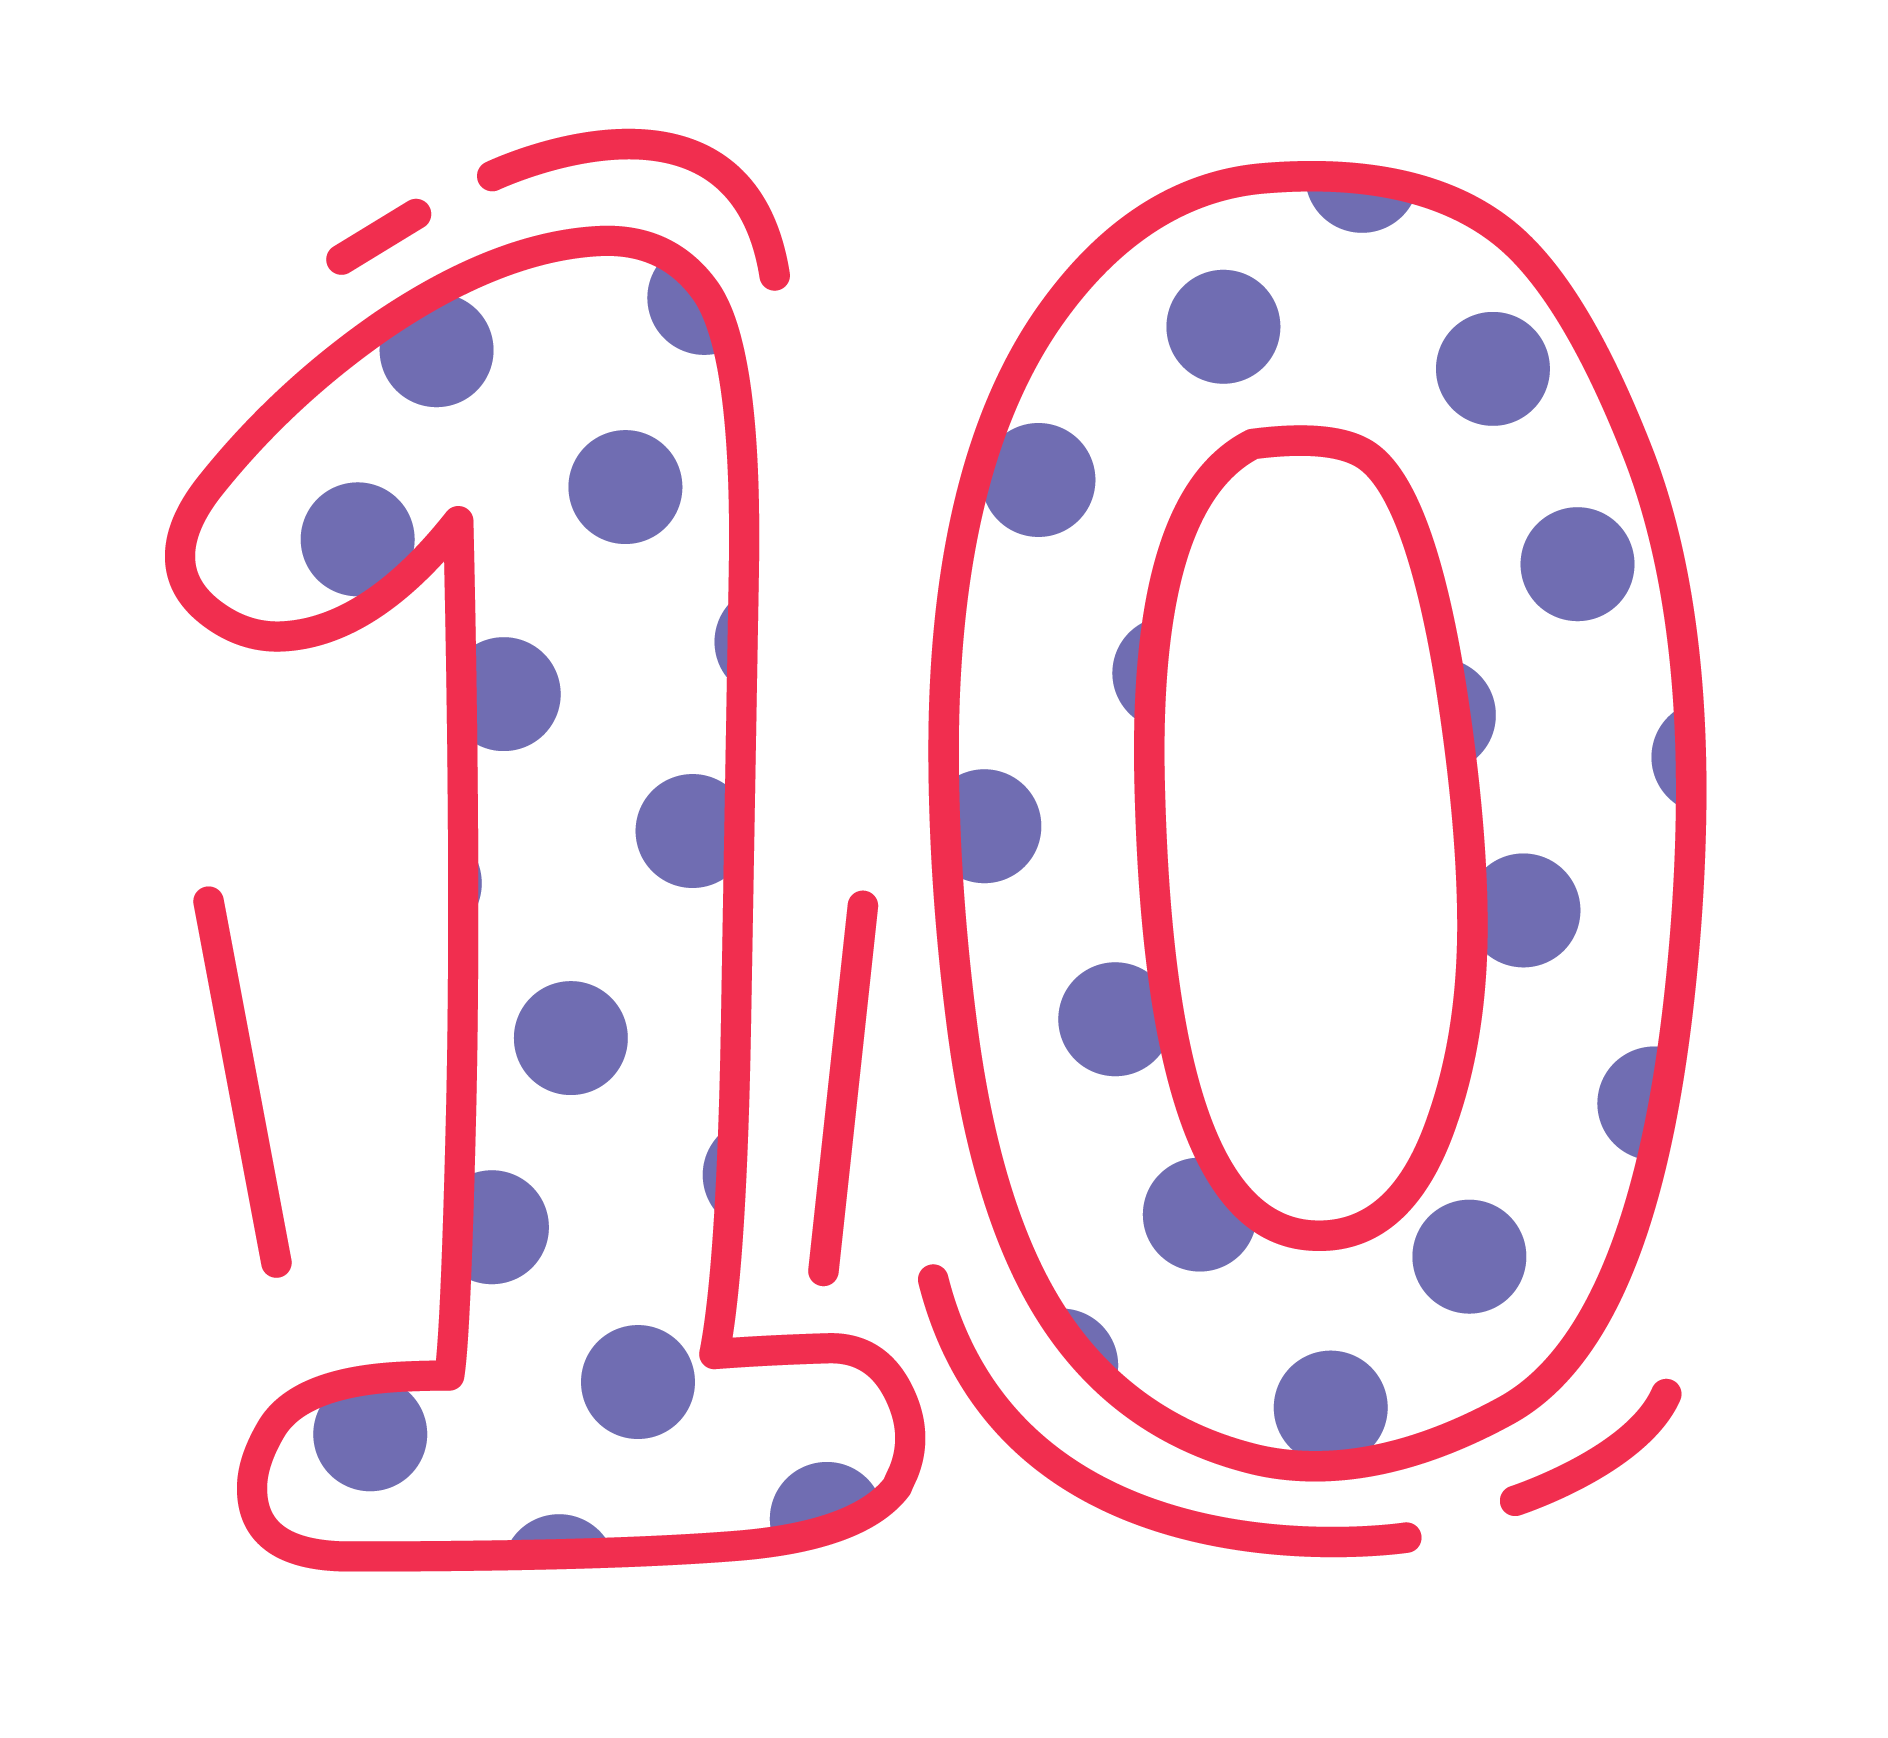 10 Number Png Images Transparent Background Png Play